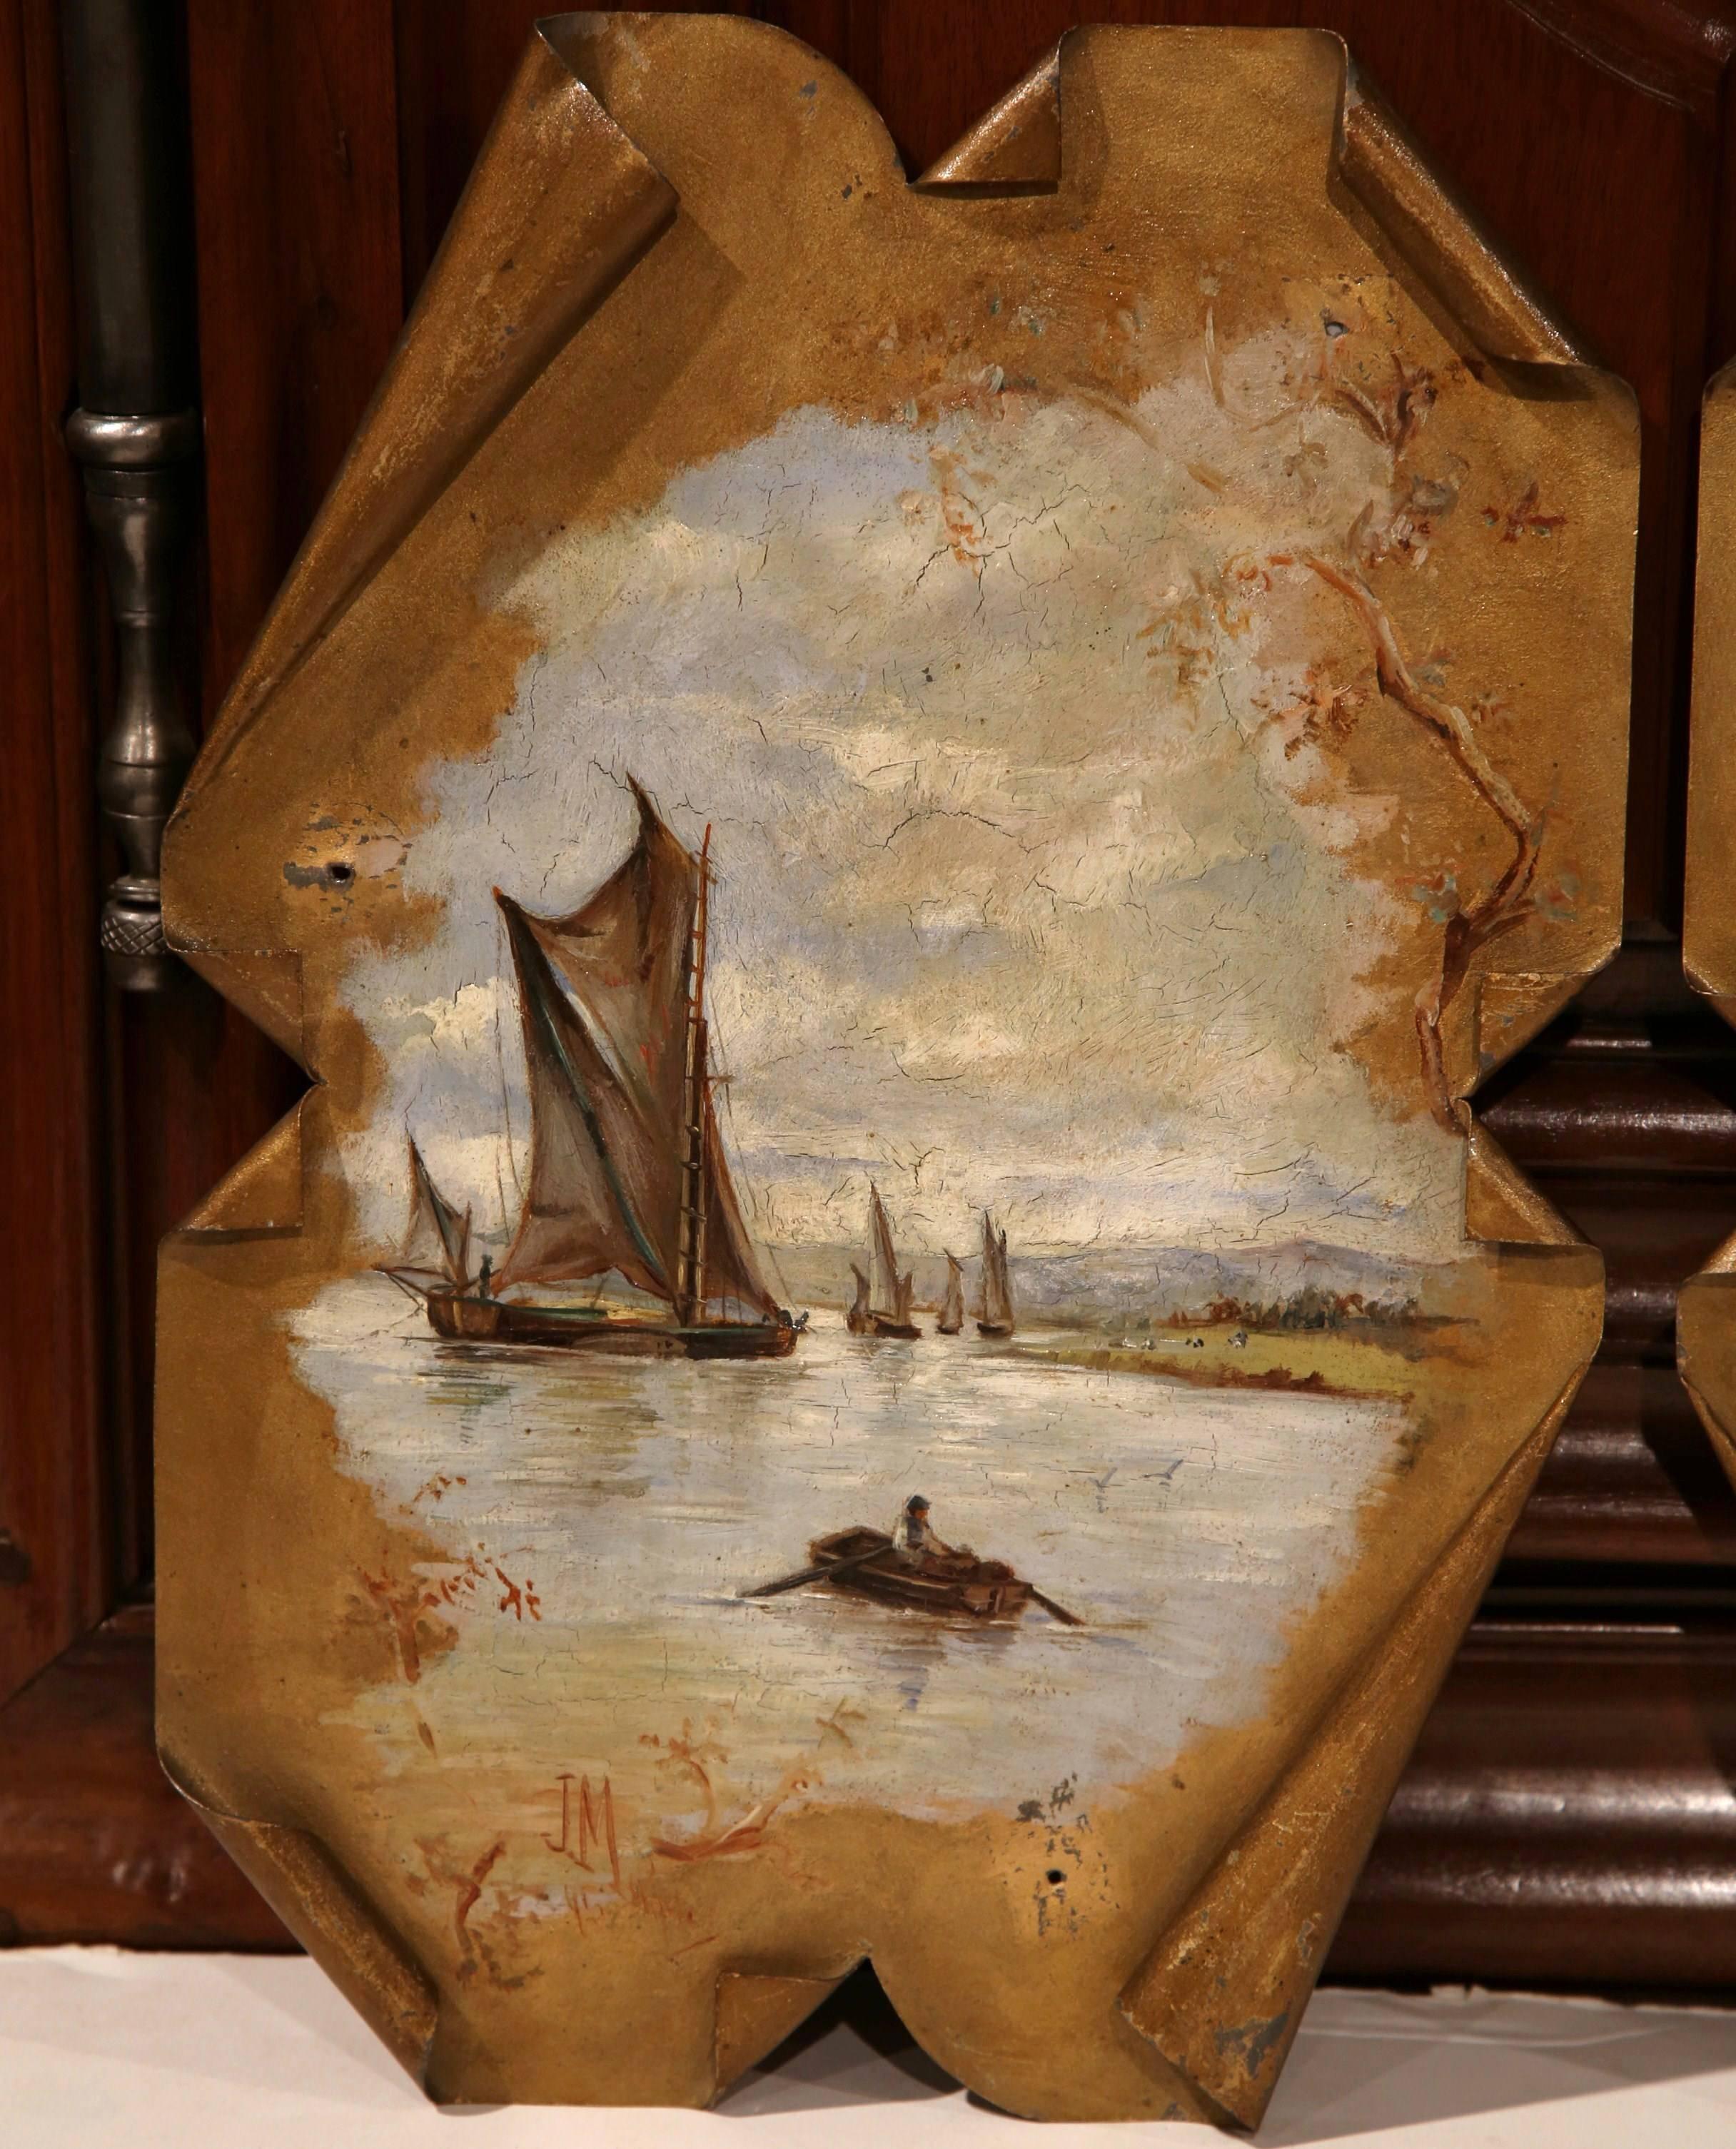 Embellish any room in your home with this interesting pair of antique tole paintings from France, circa 1880. Both compositions feature hand-painted, bucolic pastoral scenes reminiscent of the French countryside. Each panel has been purposely curved